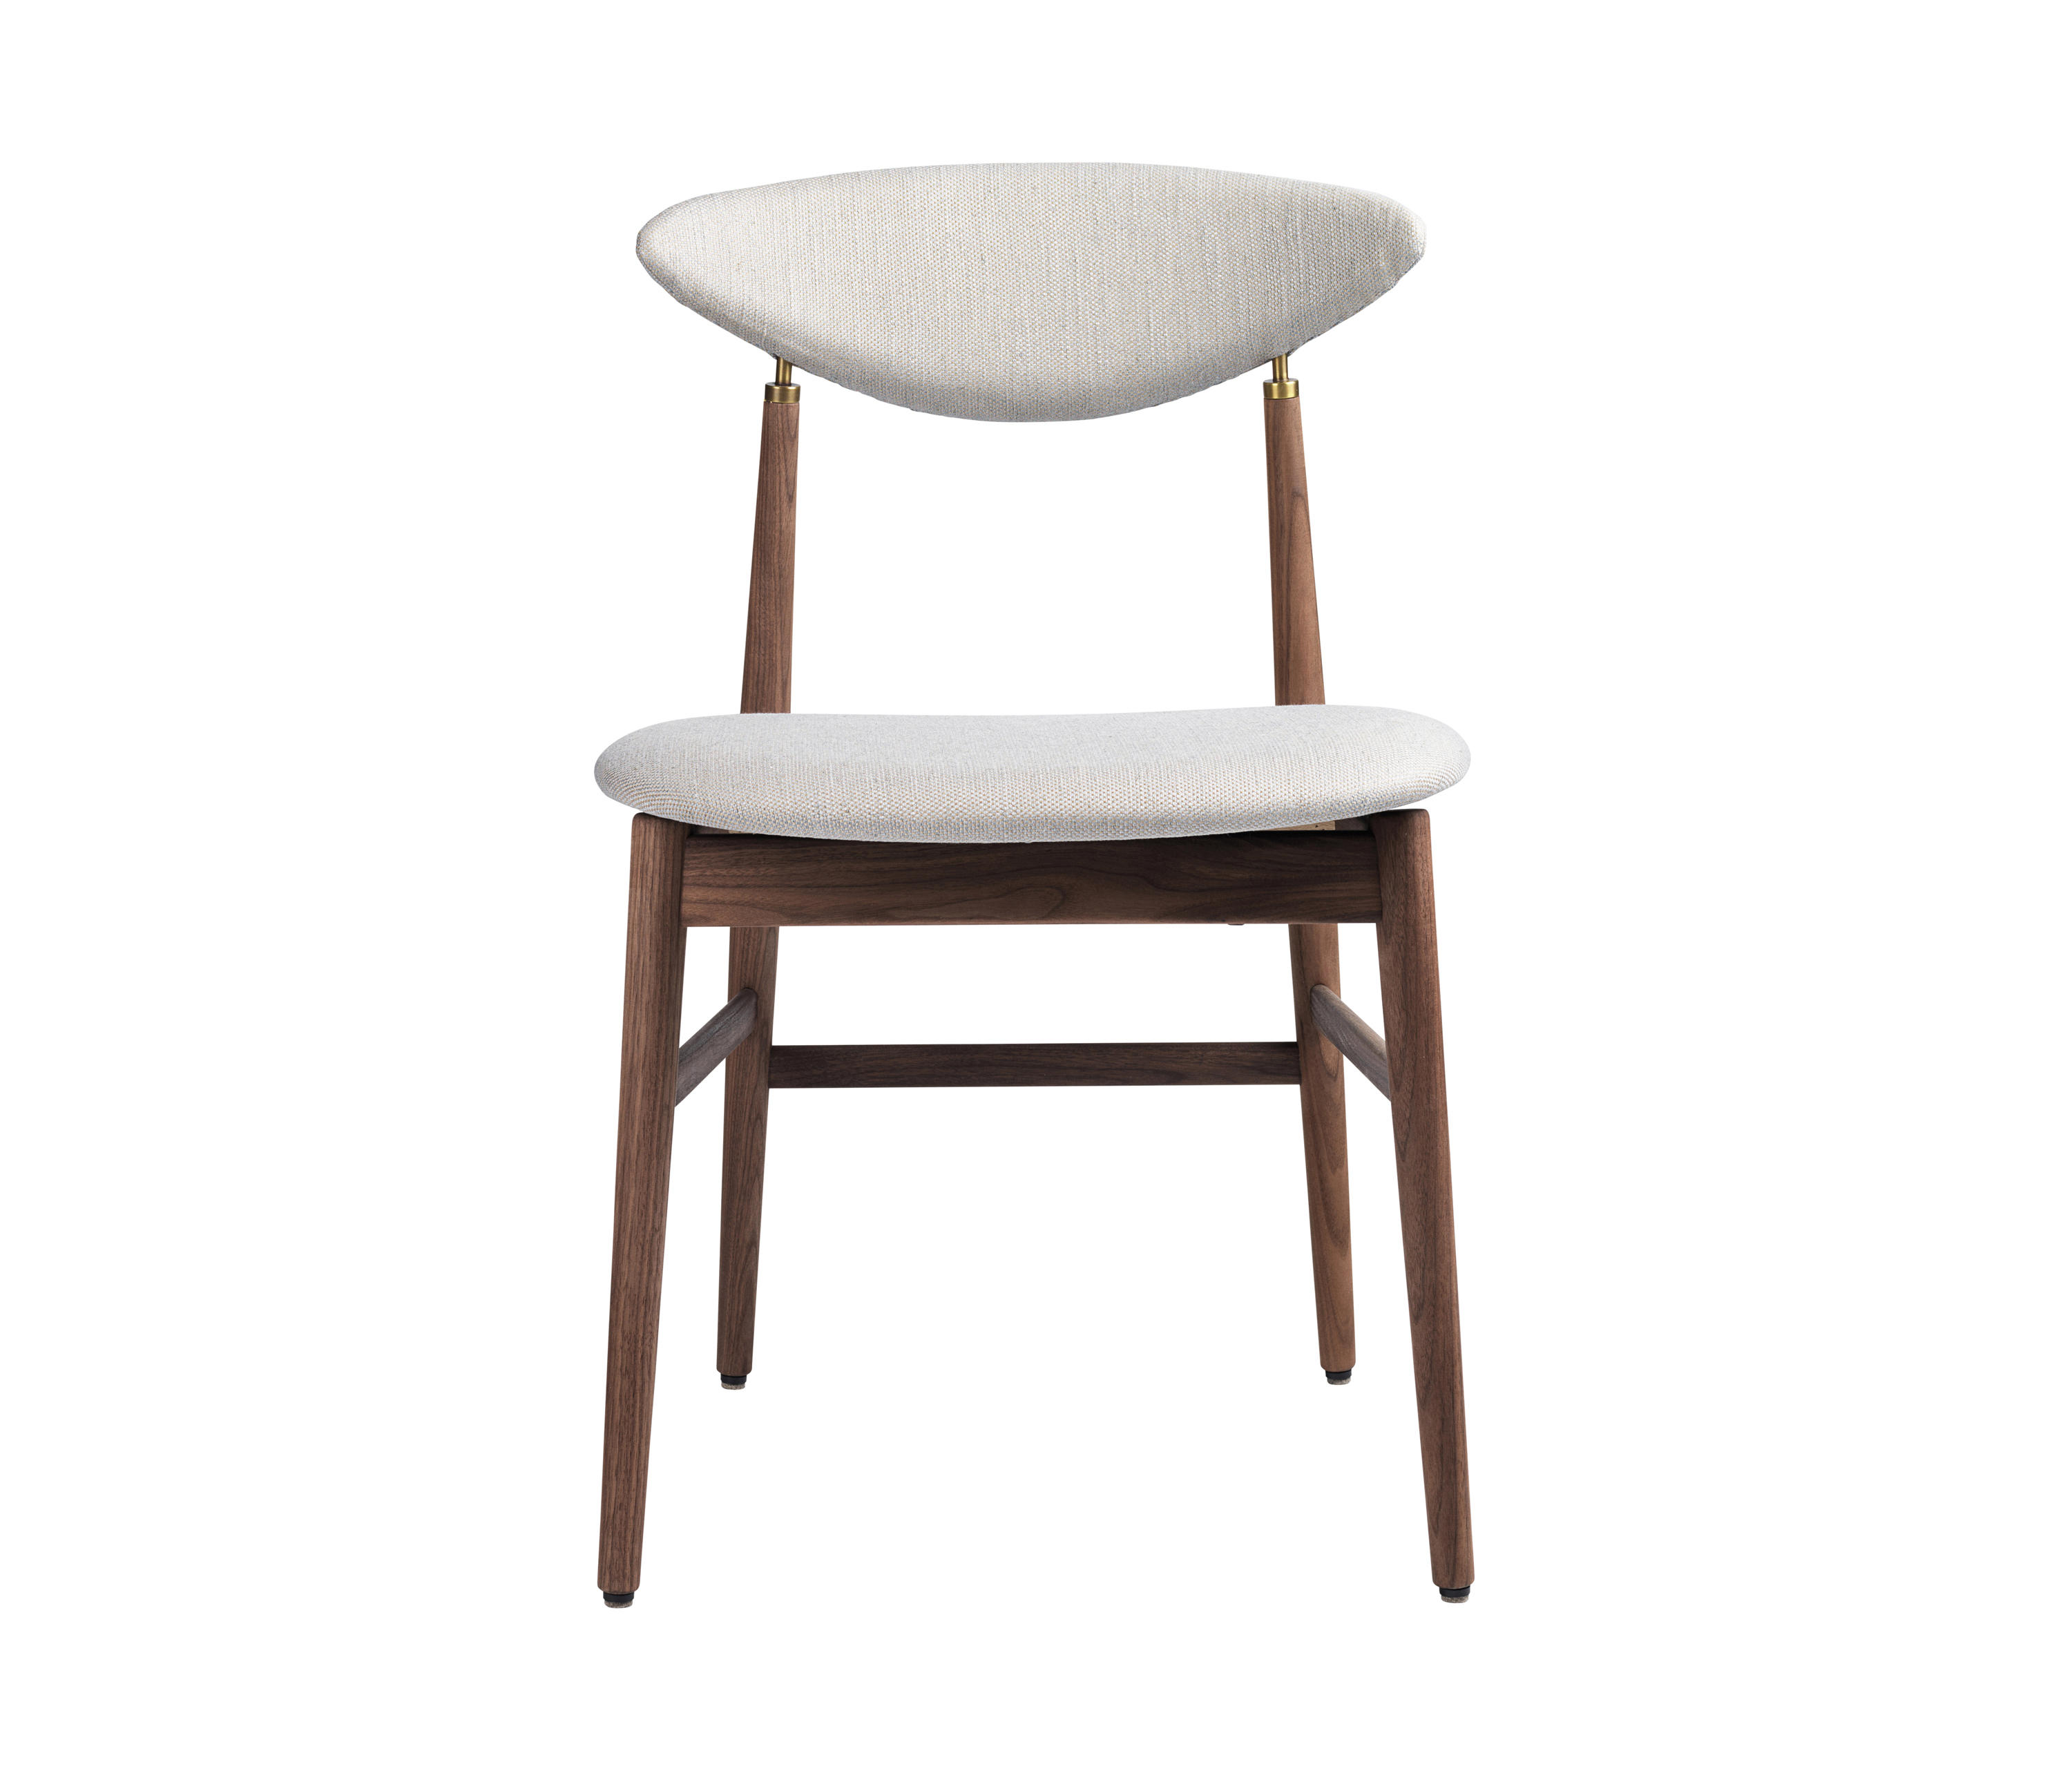 Gent Dining Chair & designer furniture | Architonic